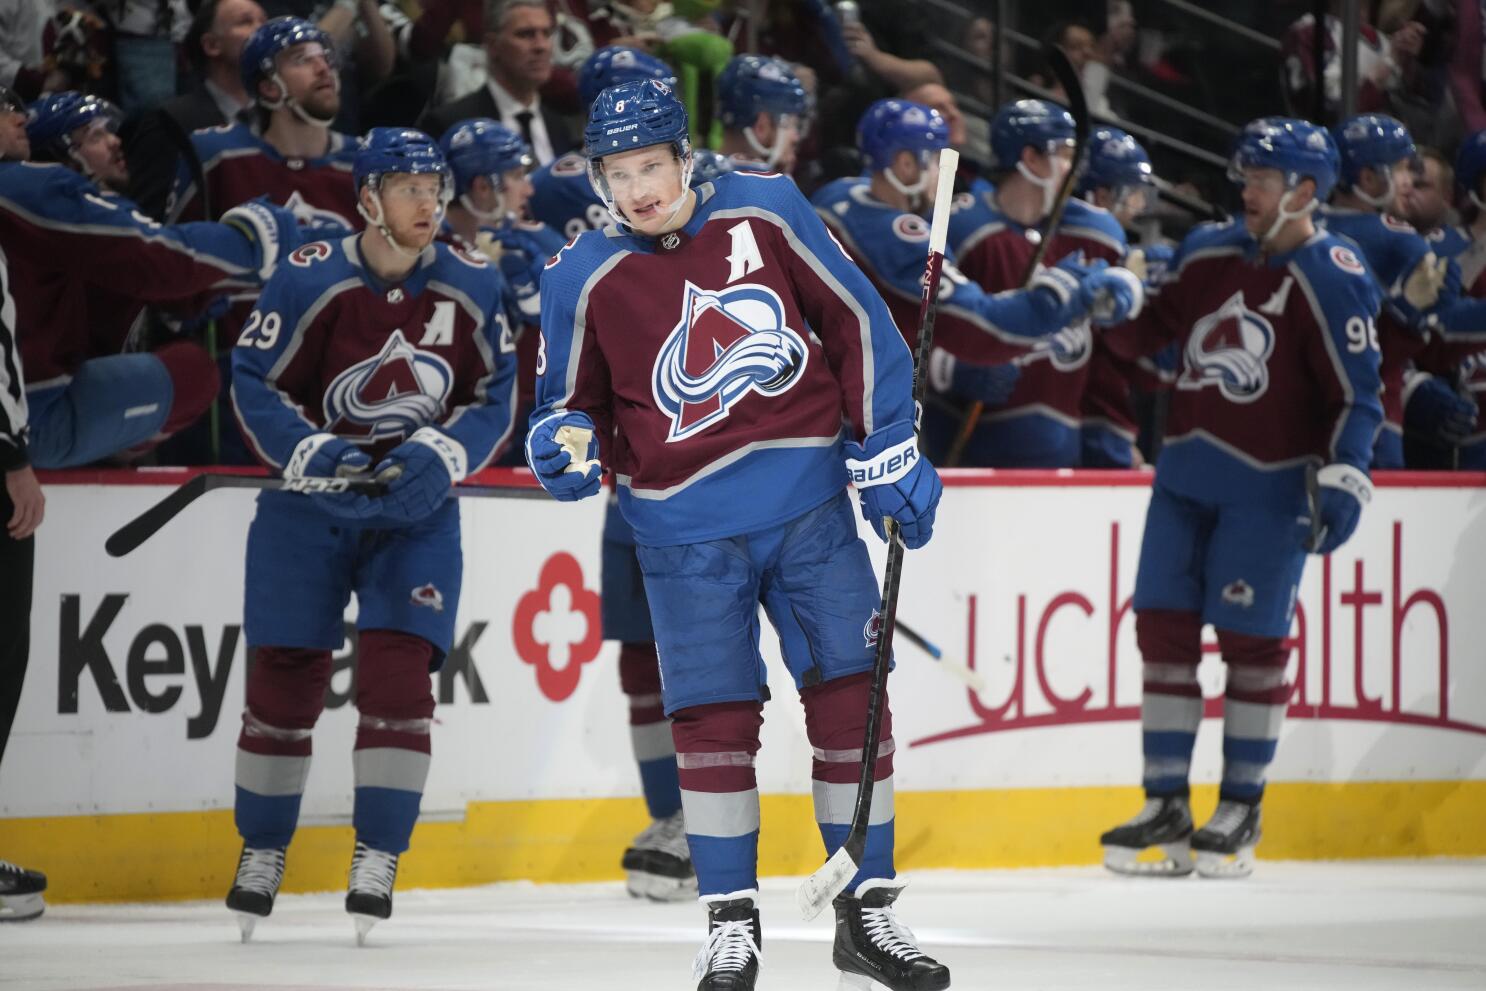 Next in the West: Is this the start of the Avalanche's reign?